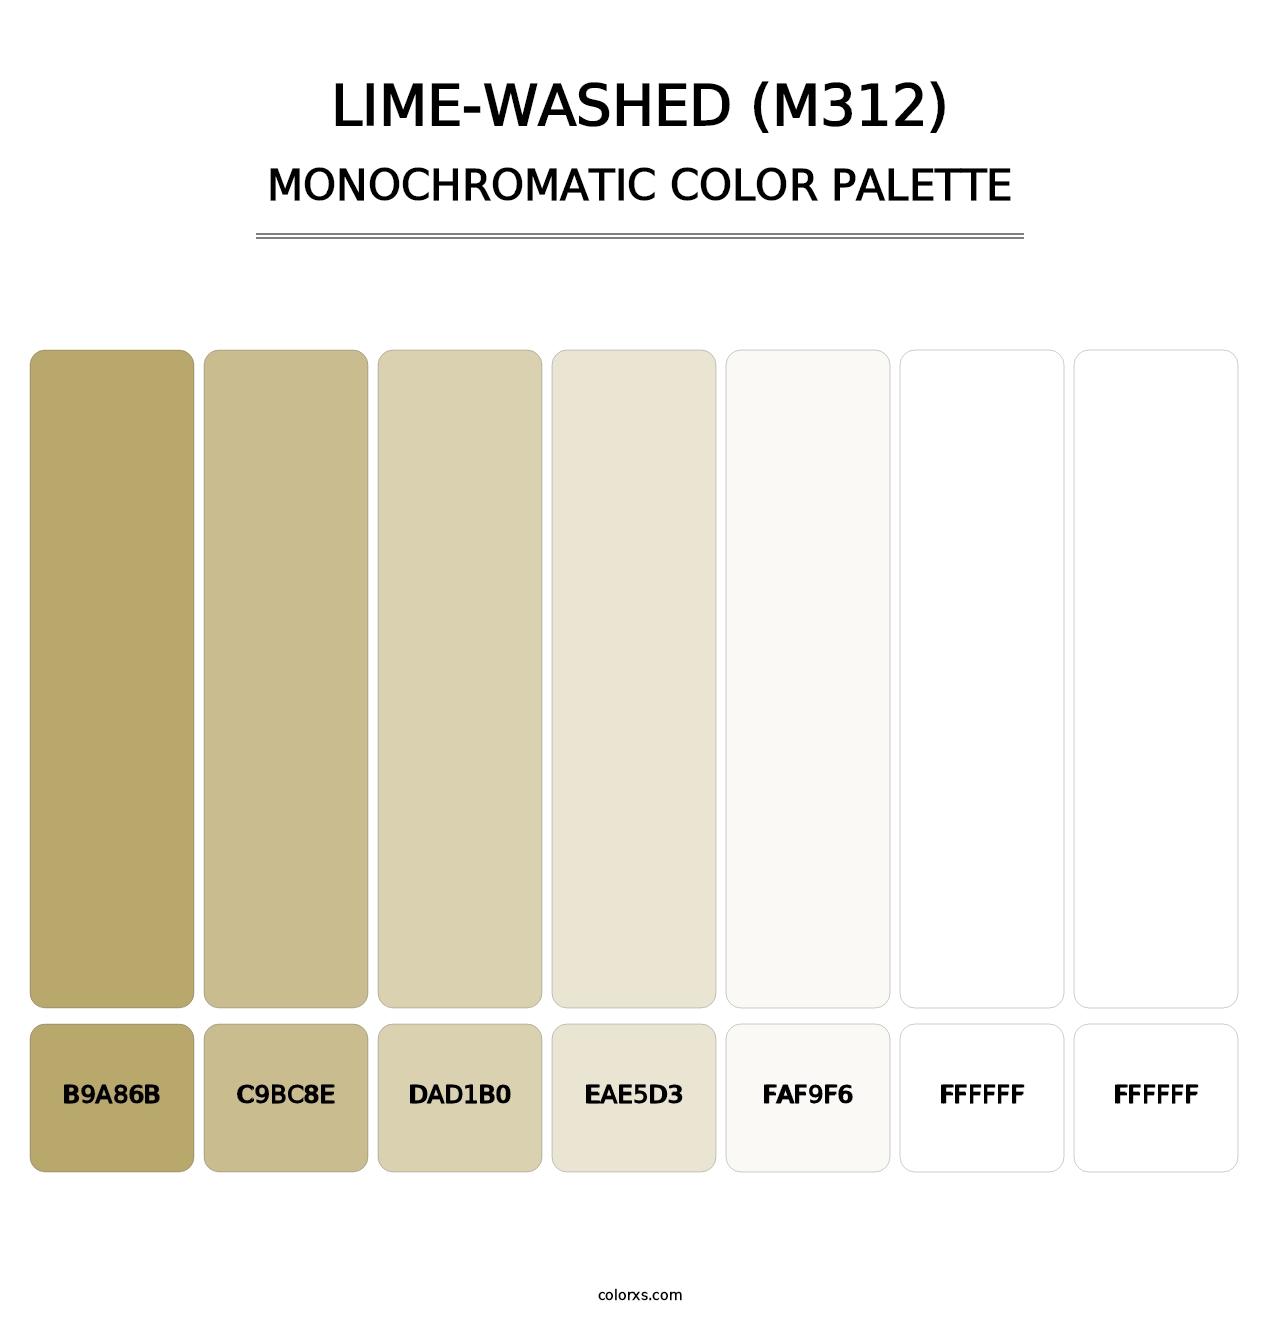 Lime-Washed (M312) - Monochromatic Color Palette